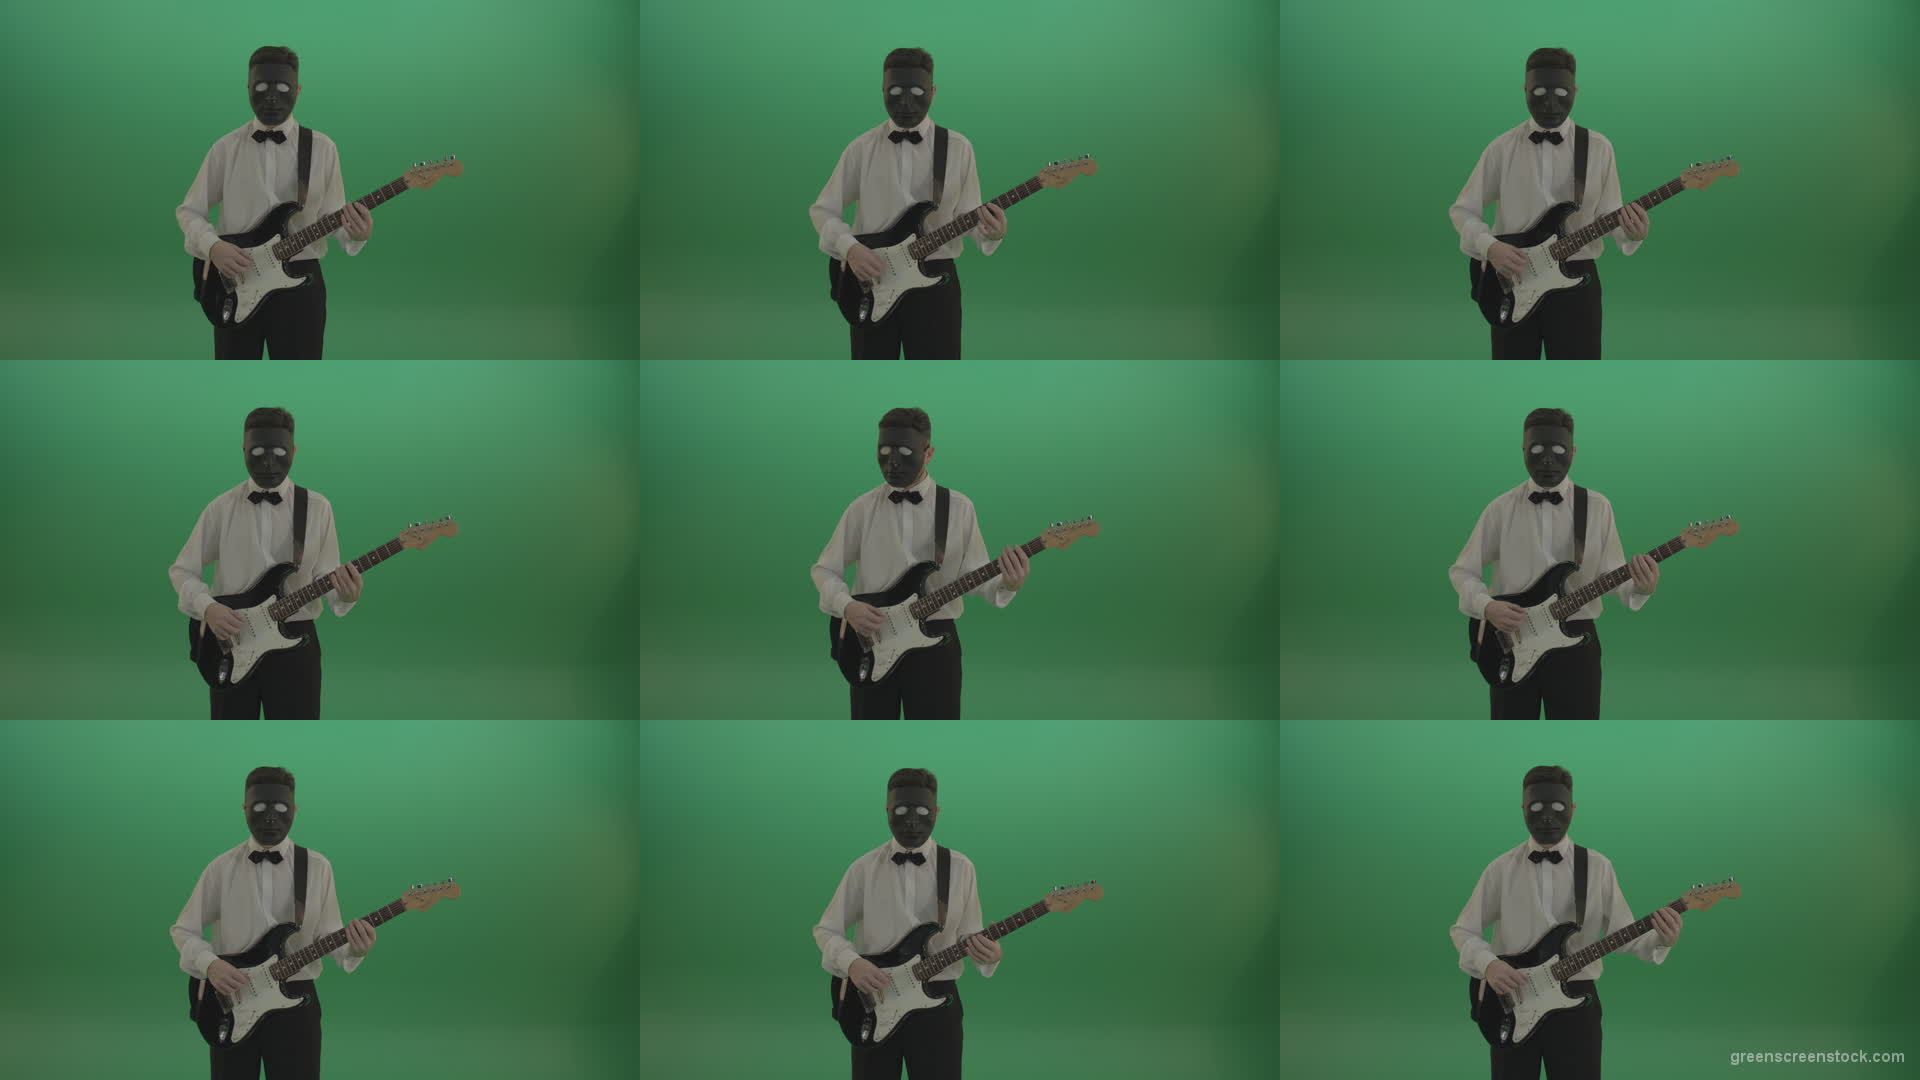 Horror-classic-guitarist-man-in-black-mask-and-white-shirt-play-guitar-on-green-screen Green Screen Stock